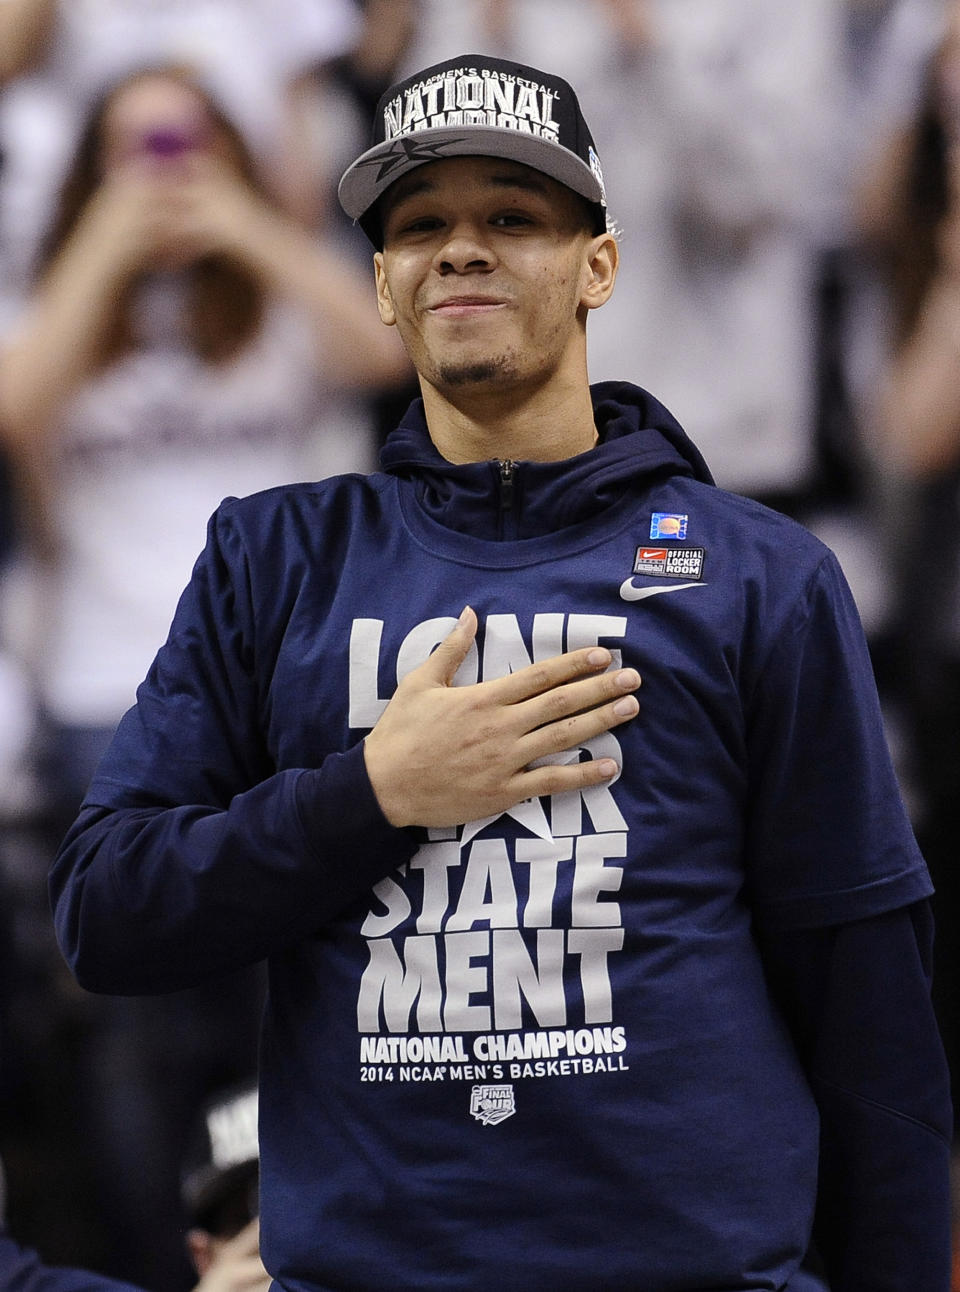 Connecticut's Shabazz Napier places his hand over his heart as he is cheered on by fans at a pep rally celebrating the program's fourth national championship, Tuesday, April 8, 2014, in Storrs, Conn. (AP Photo/Jessica Hill)